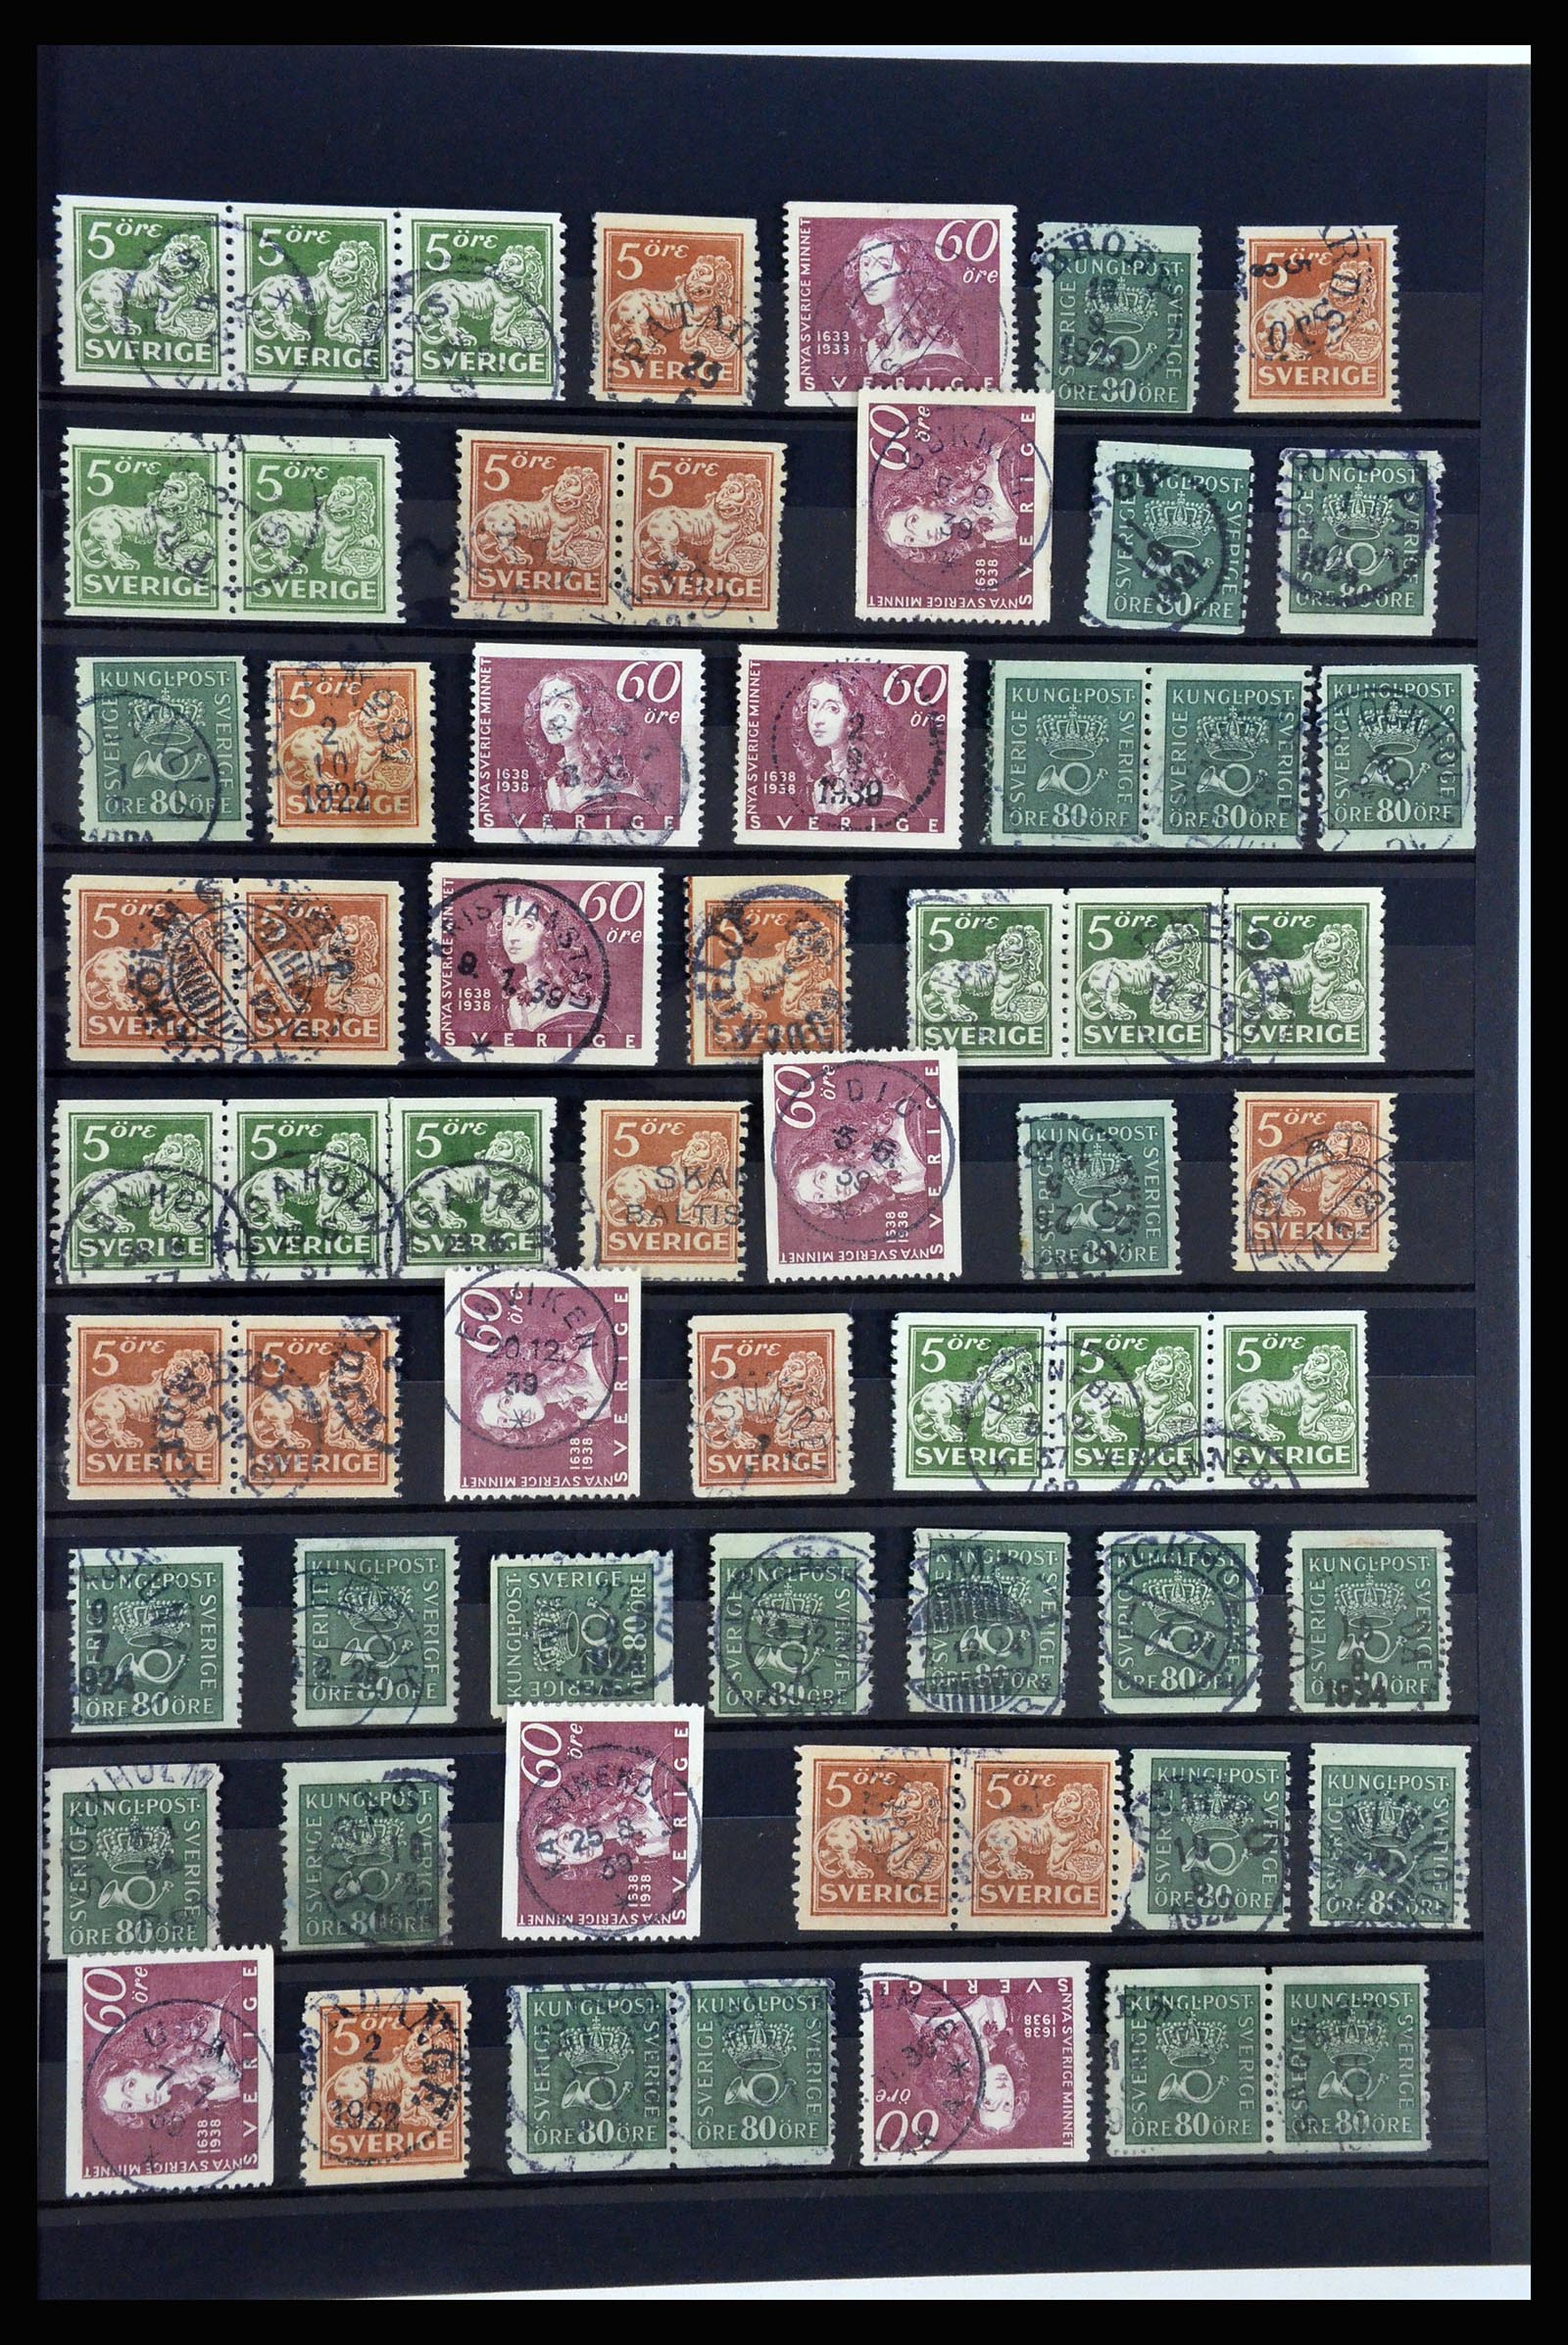 36316 003 - Stamp collection 36316 Sweden cancellations 1920-1938.